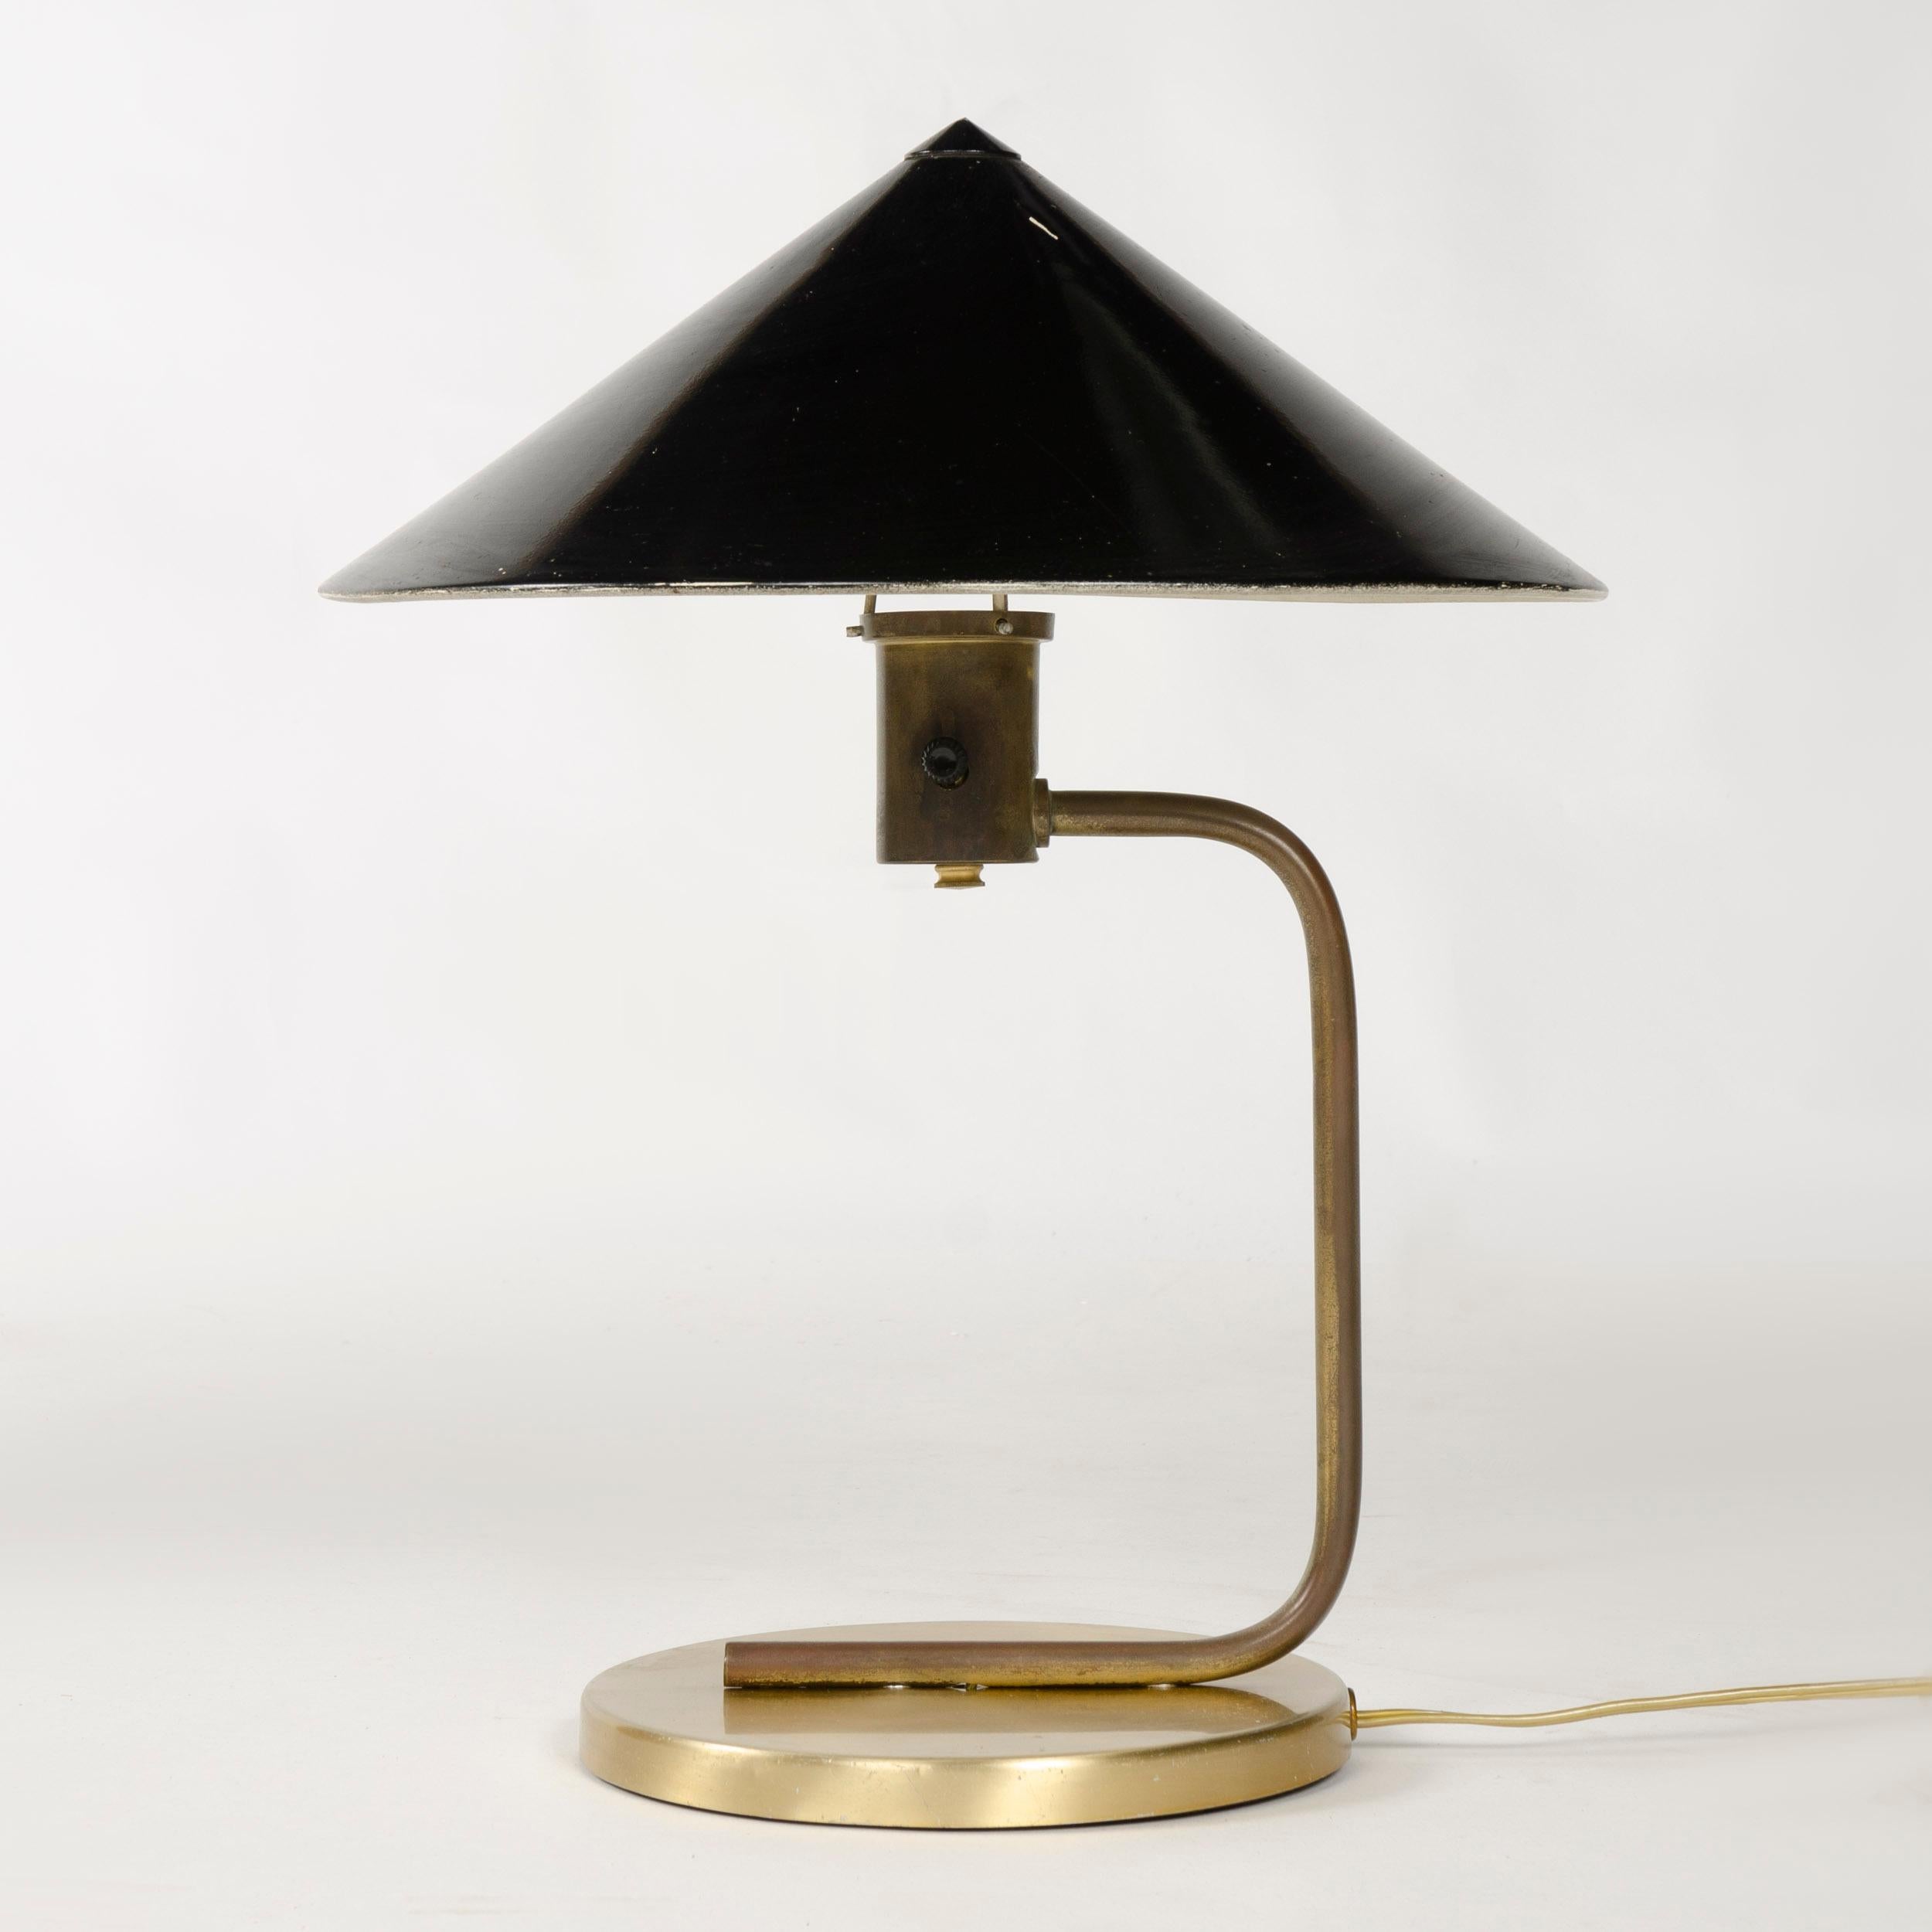 A brass and steel desk lamp with a conical spun aluminum black enameled shade.